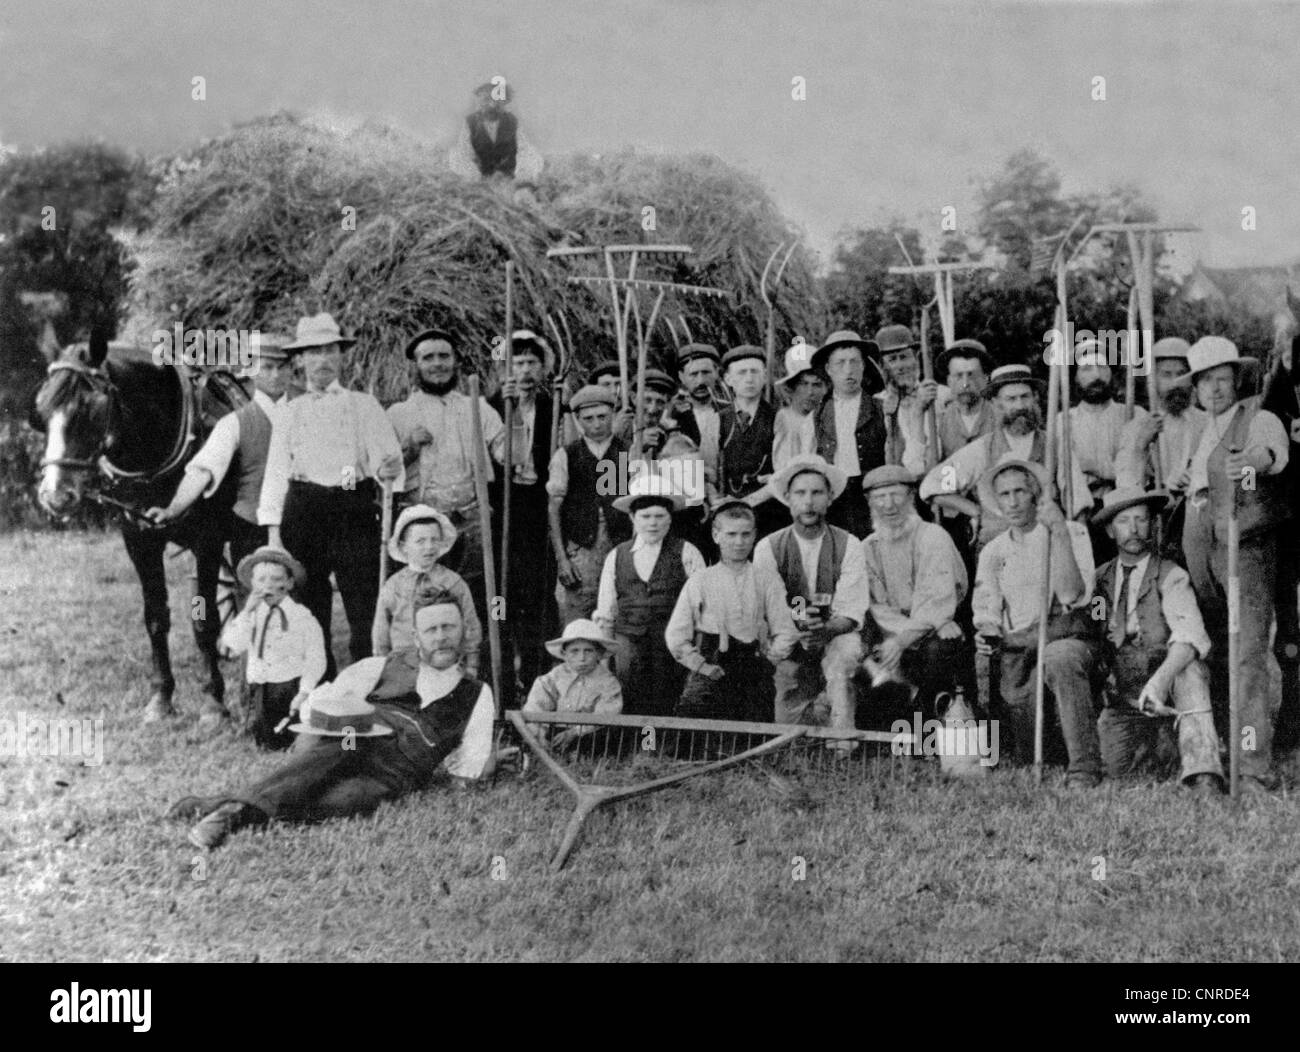 A vintage harvest image from a farm in Sussex in 1901. There are twenty-eight members of this harvesting team from old to young. Stock Photo